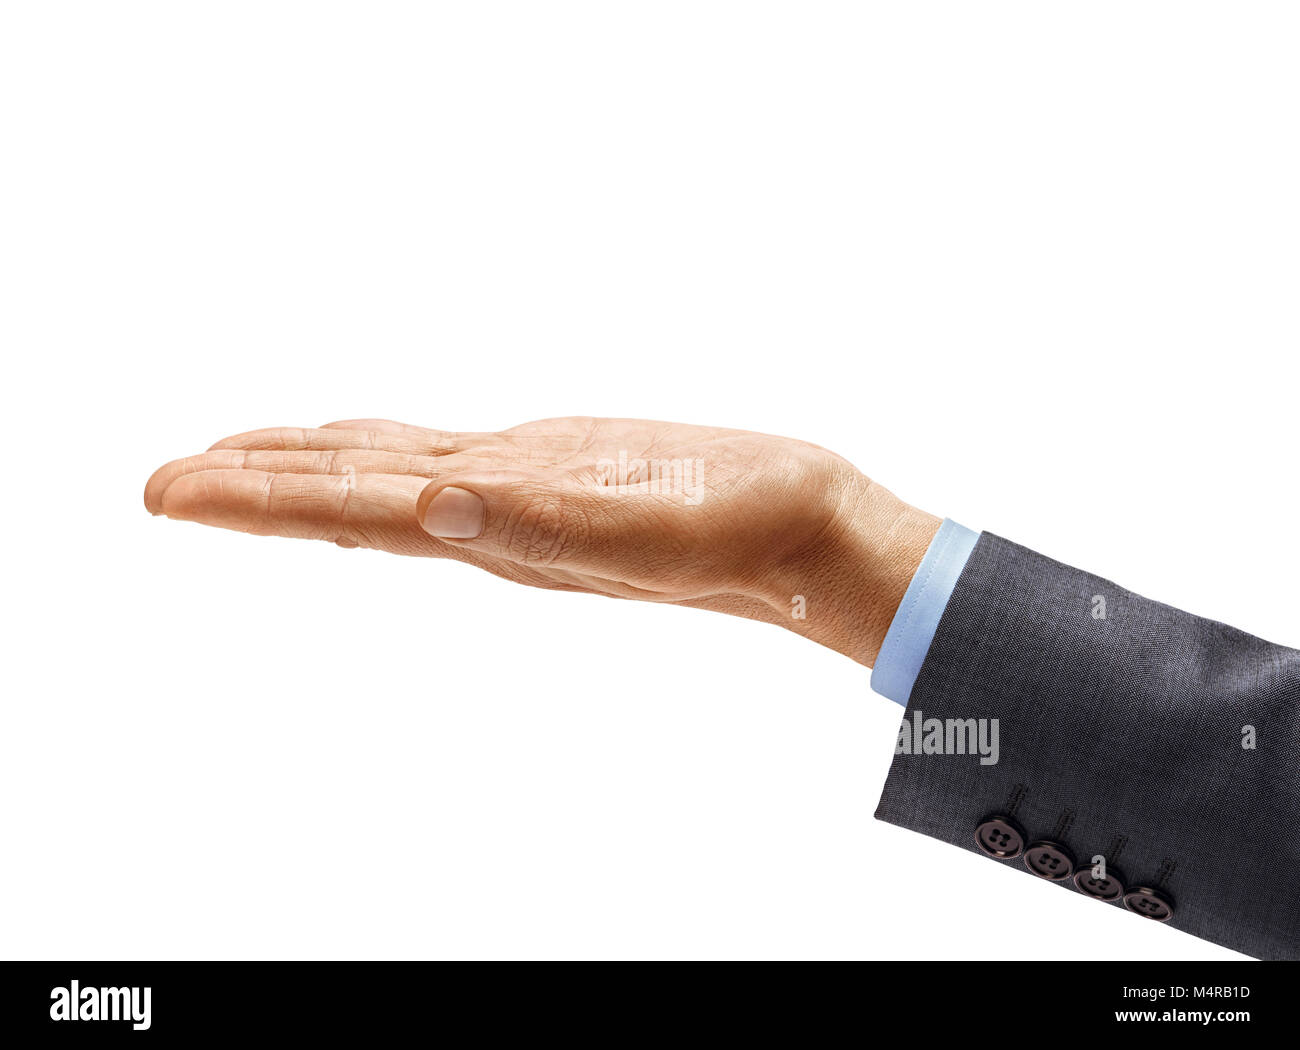 Man's hand in suit holding open palm up isolated on white background. Palm up, close up. High resolution product Stock Photo